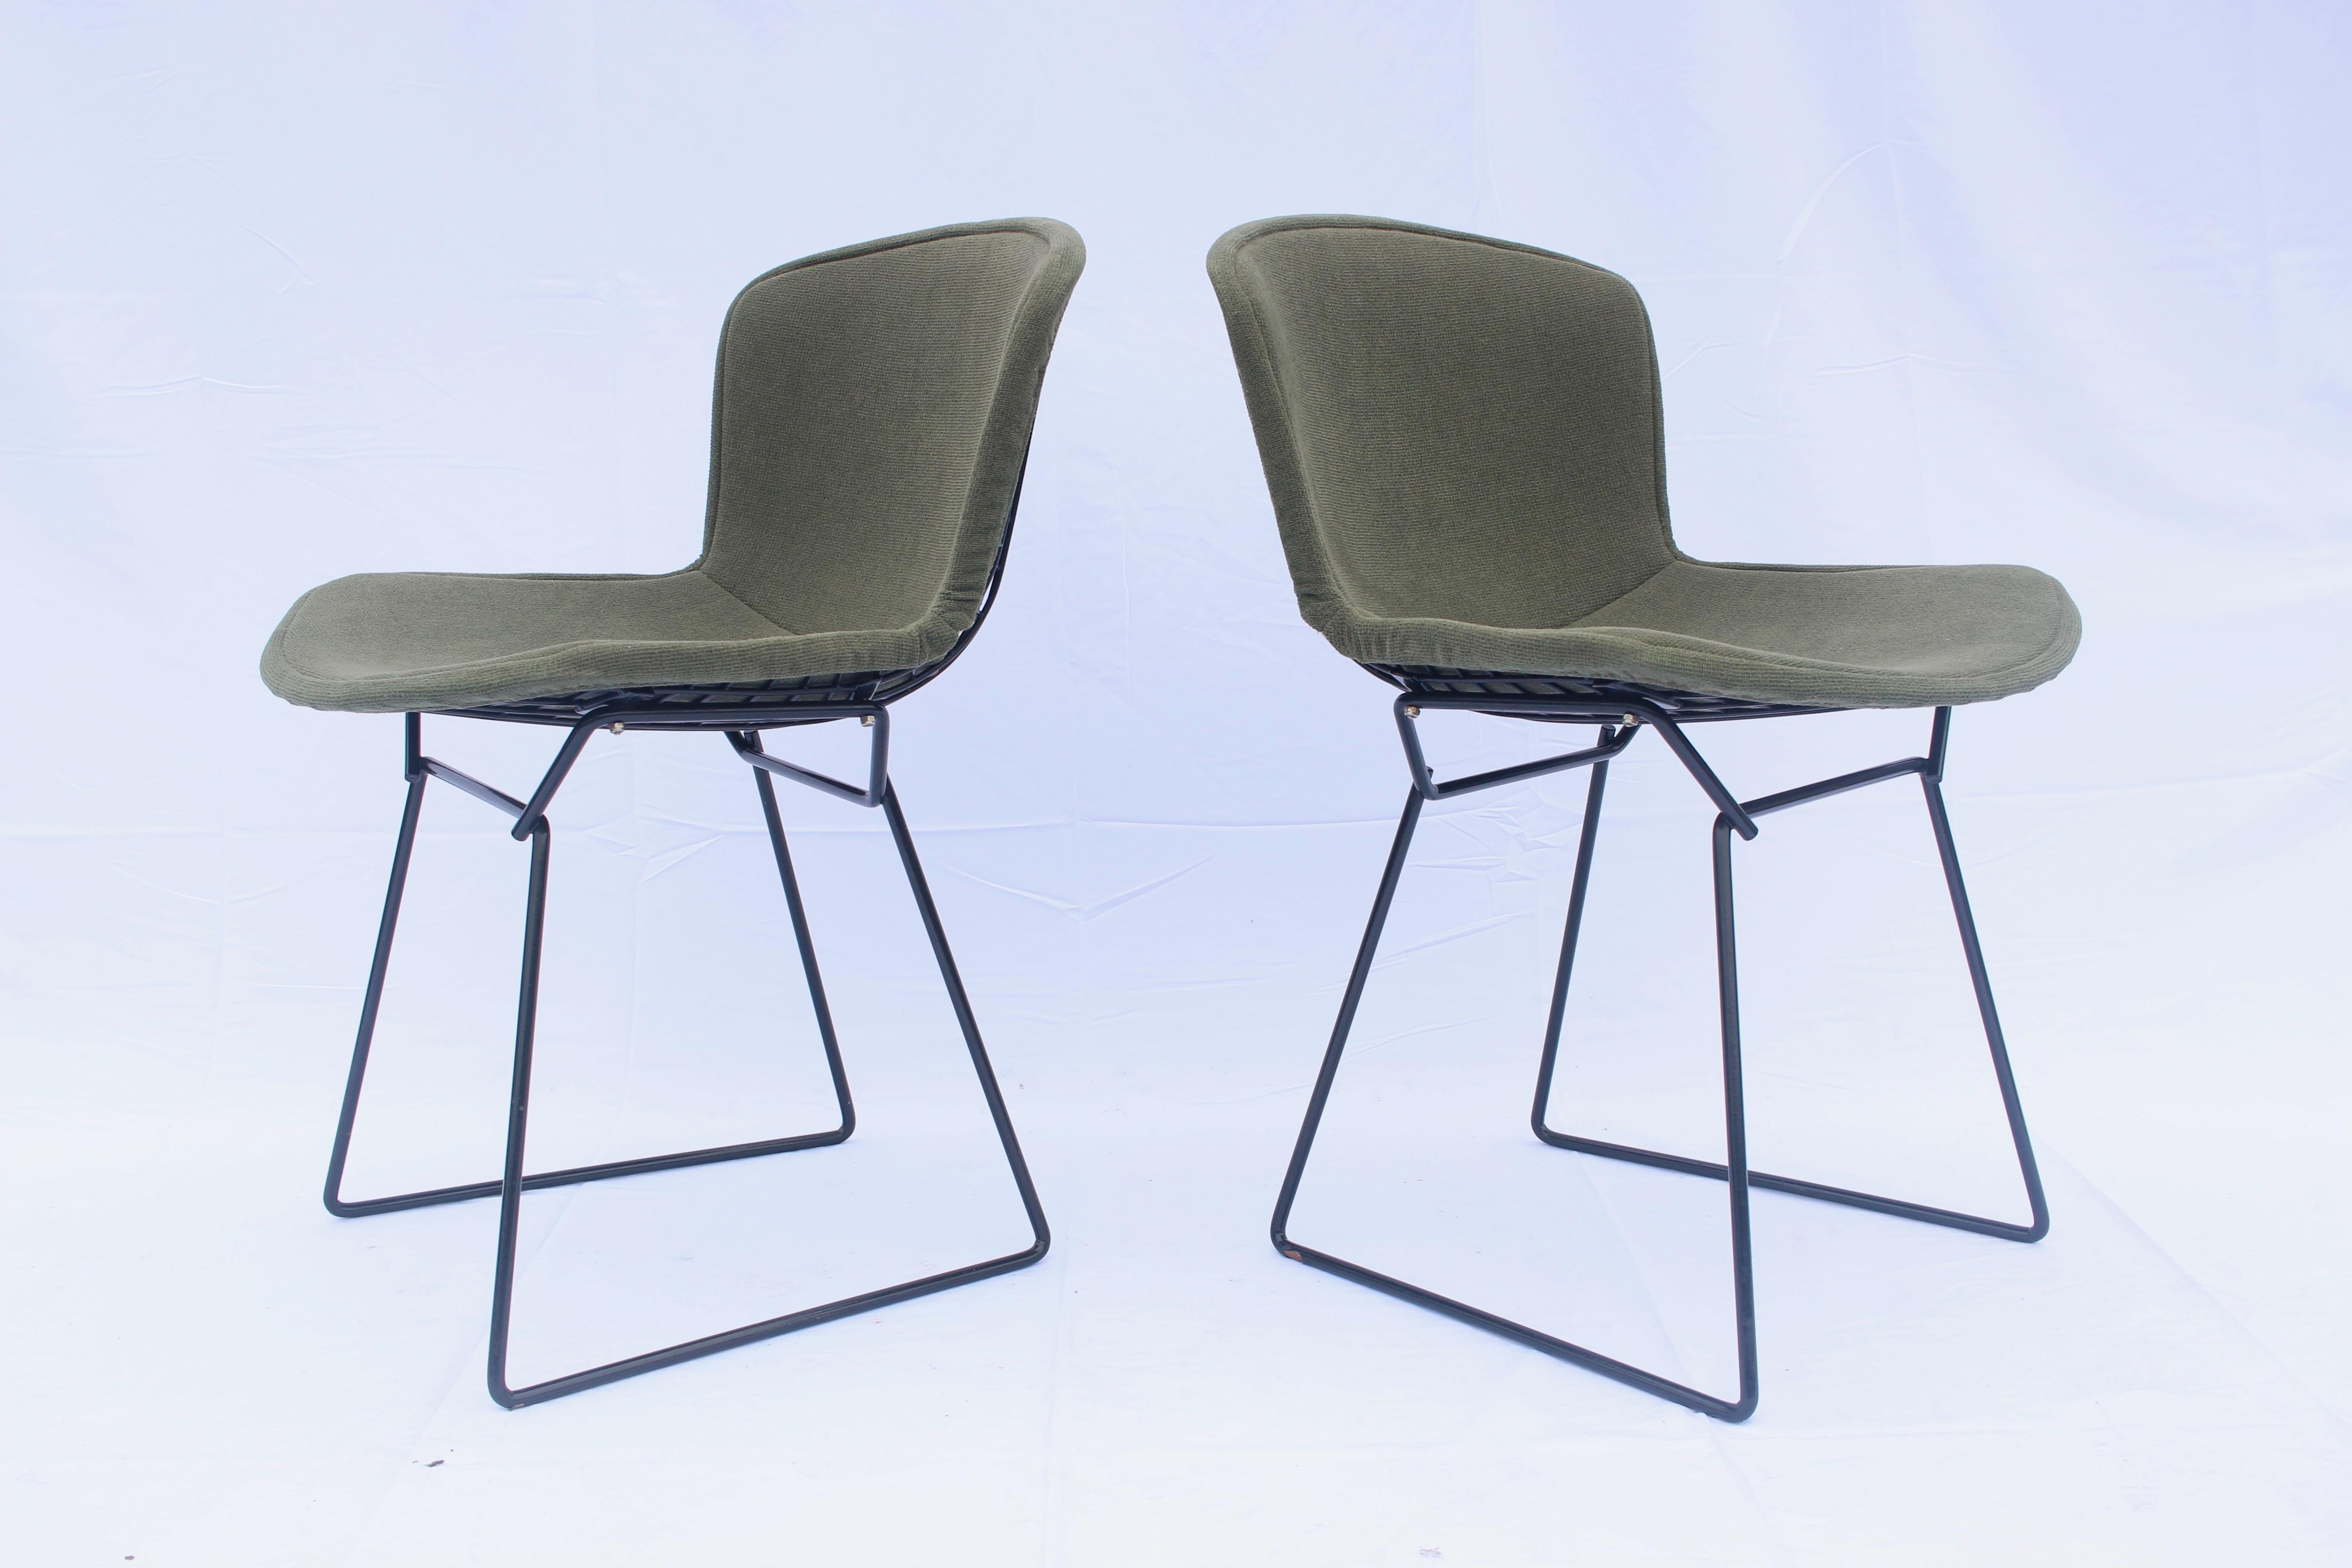 American Set of 6 or 8 Harry Bertoia for Knoll Wire Chairs, 1960s-1970s